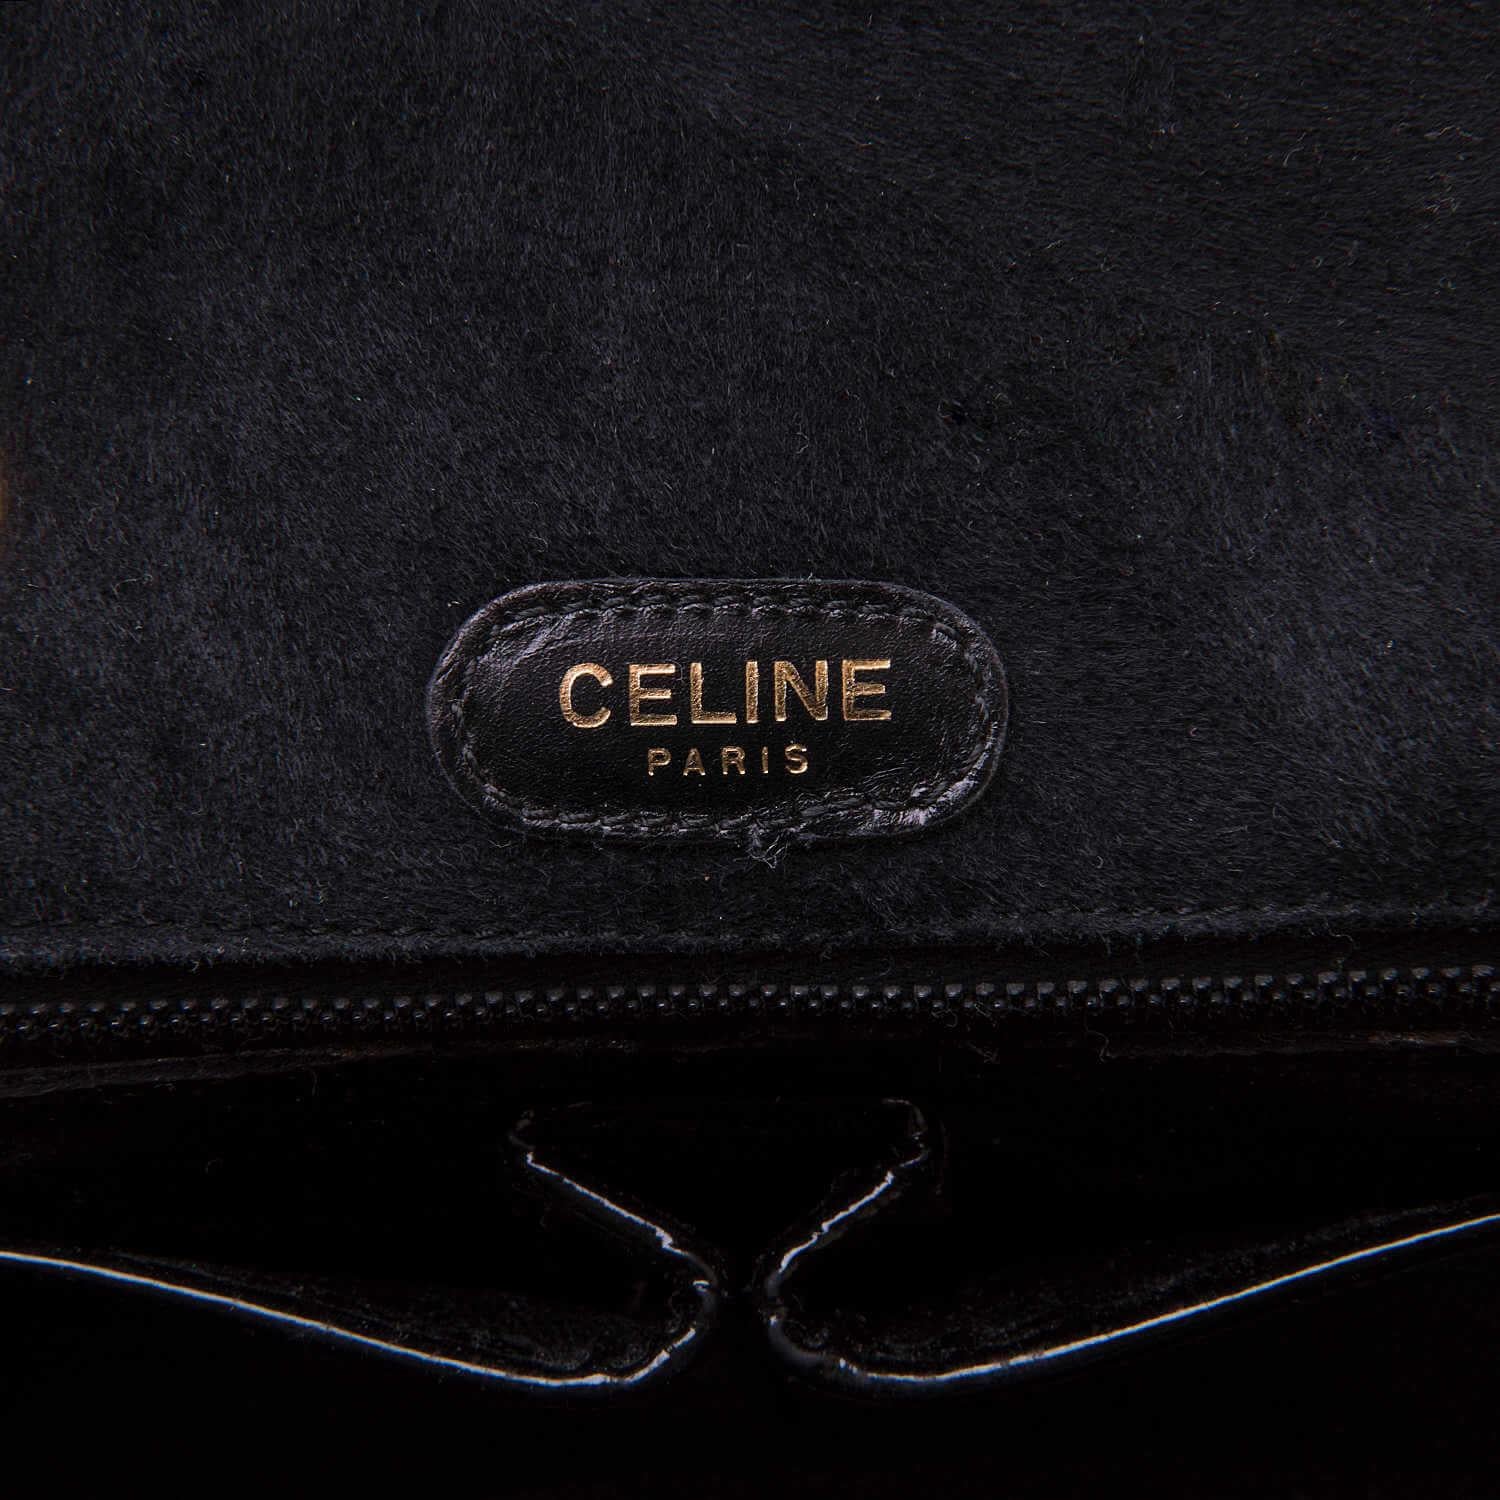 This classic beautiful vintage shoulder bag by Celine of Paris, is finished in black calf-suede with gold-tone hardware. Of superb quality, the double chain-link handles are complemented by Celine's iconic latch-clasp. In superb condition, inside